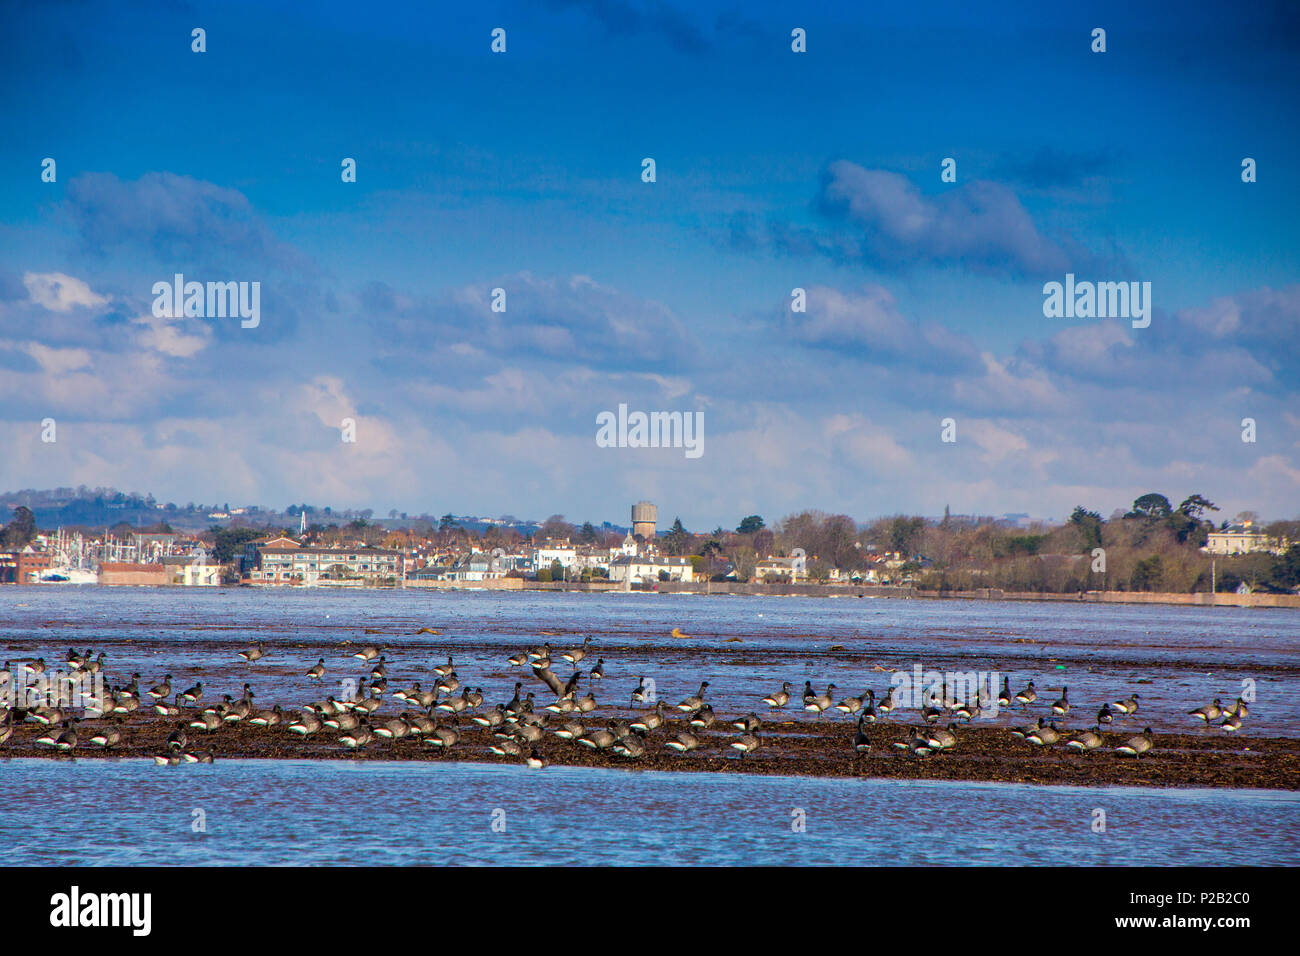 A flock of Brent Geese (Branta bernicla) on the mudflats of the River Exe near Topsham, Devon, England, UK Stock Photo